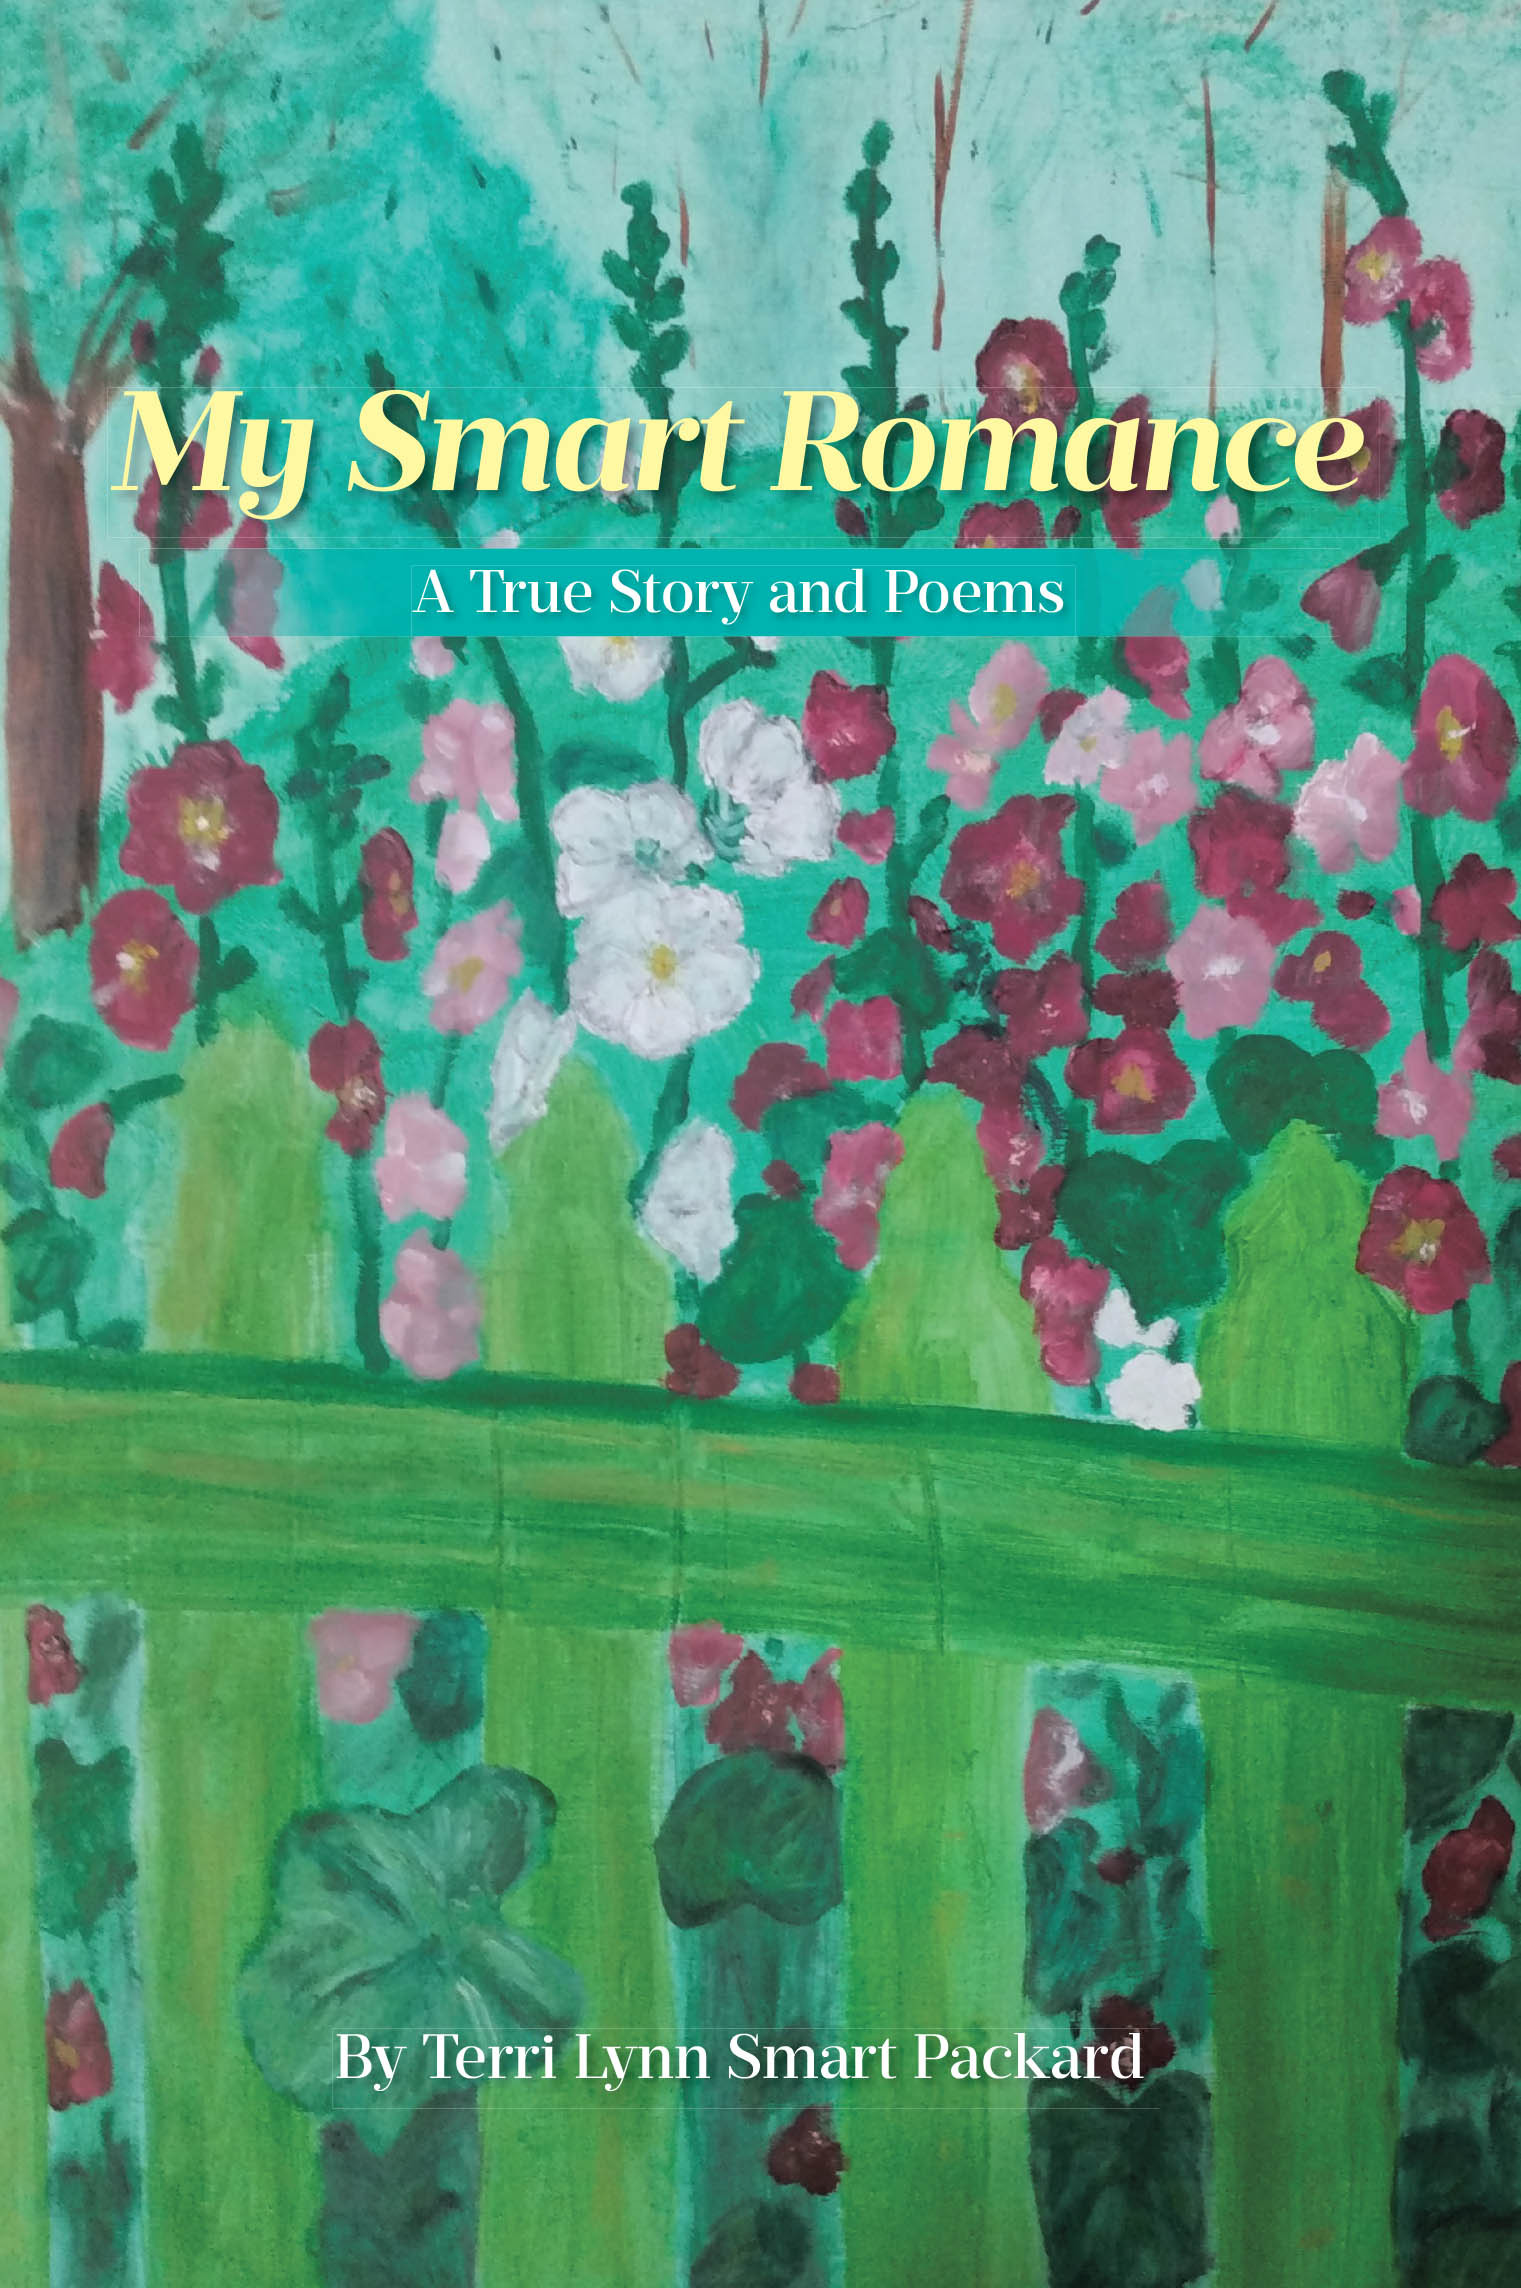 Author Terri Lynn Smart Packard’s New Book, “My Smart Romance: A True Story and Poems,” is a Heartfelt Account of the Author’s Journey of Faith, Love, & Personal Growth